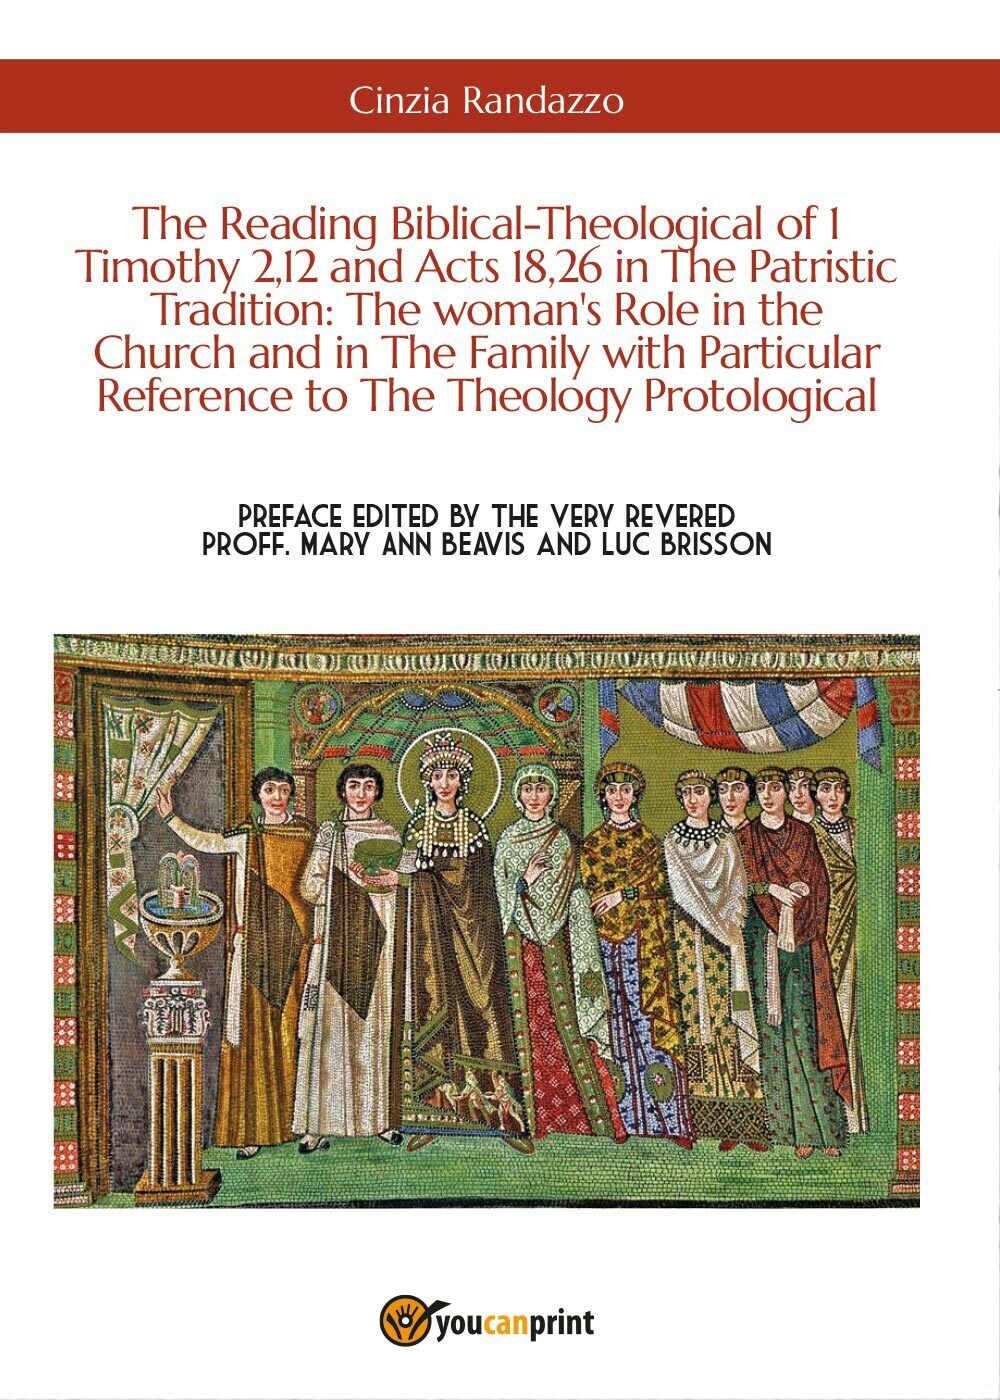 The Reading Biblical-Theological of 1 Timothy 2,12 and Acts 18,26  libro usato